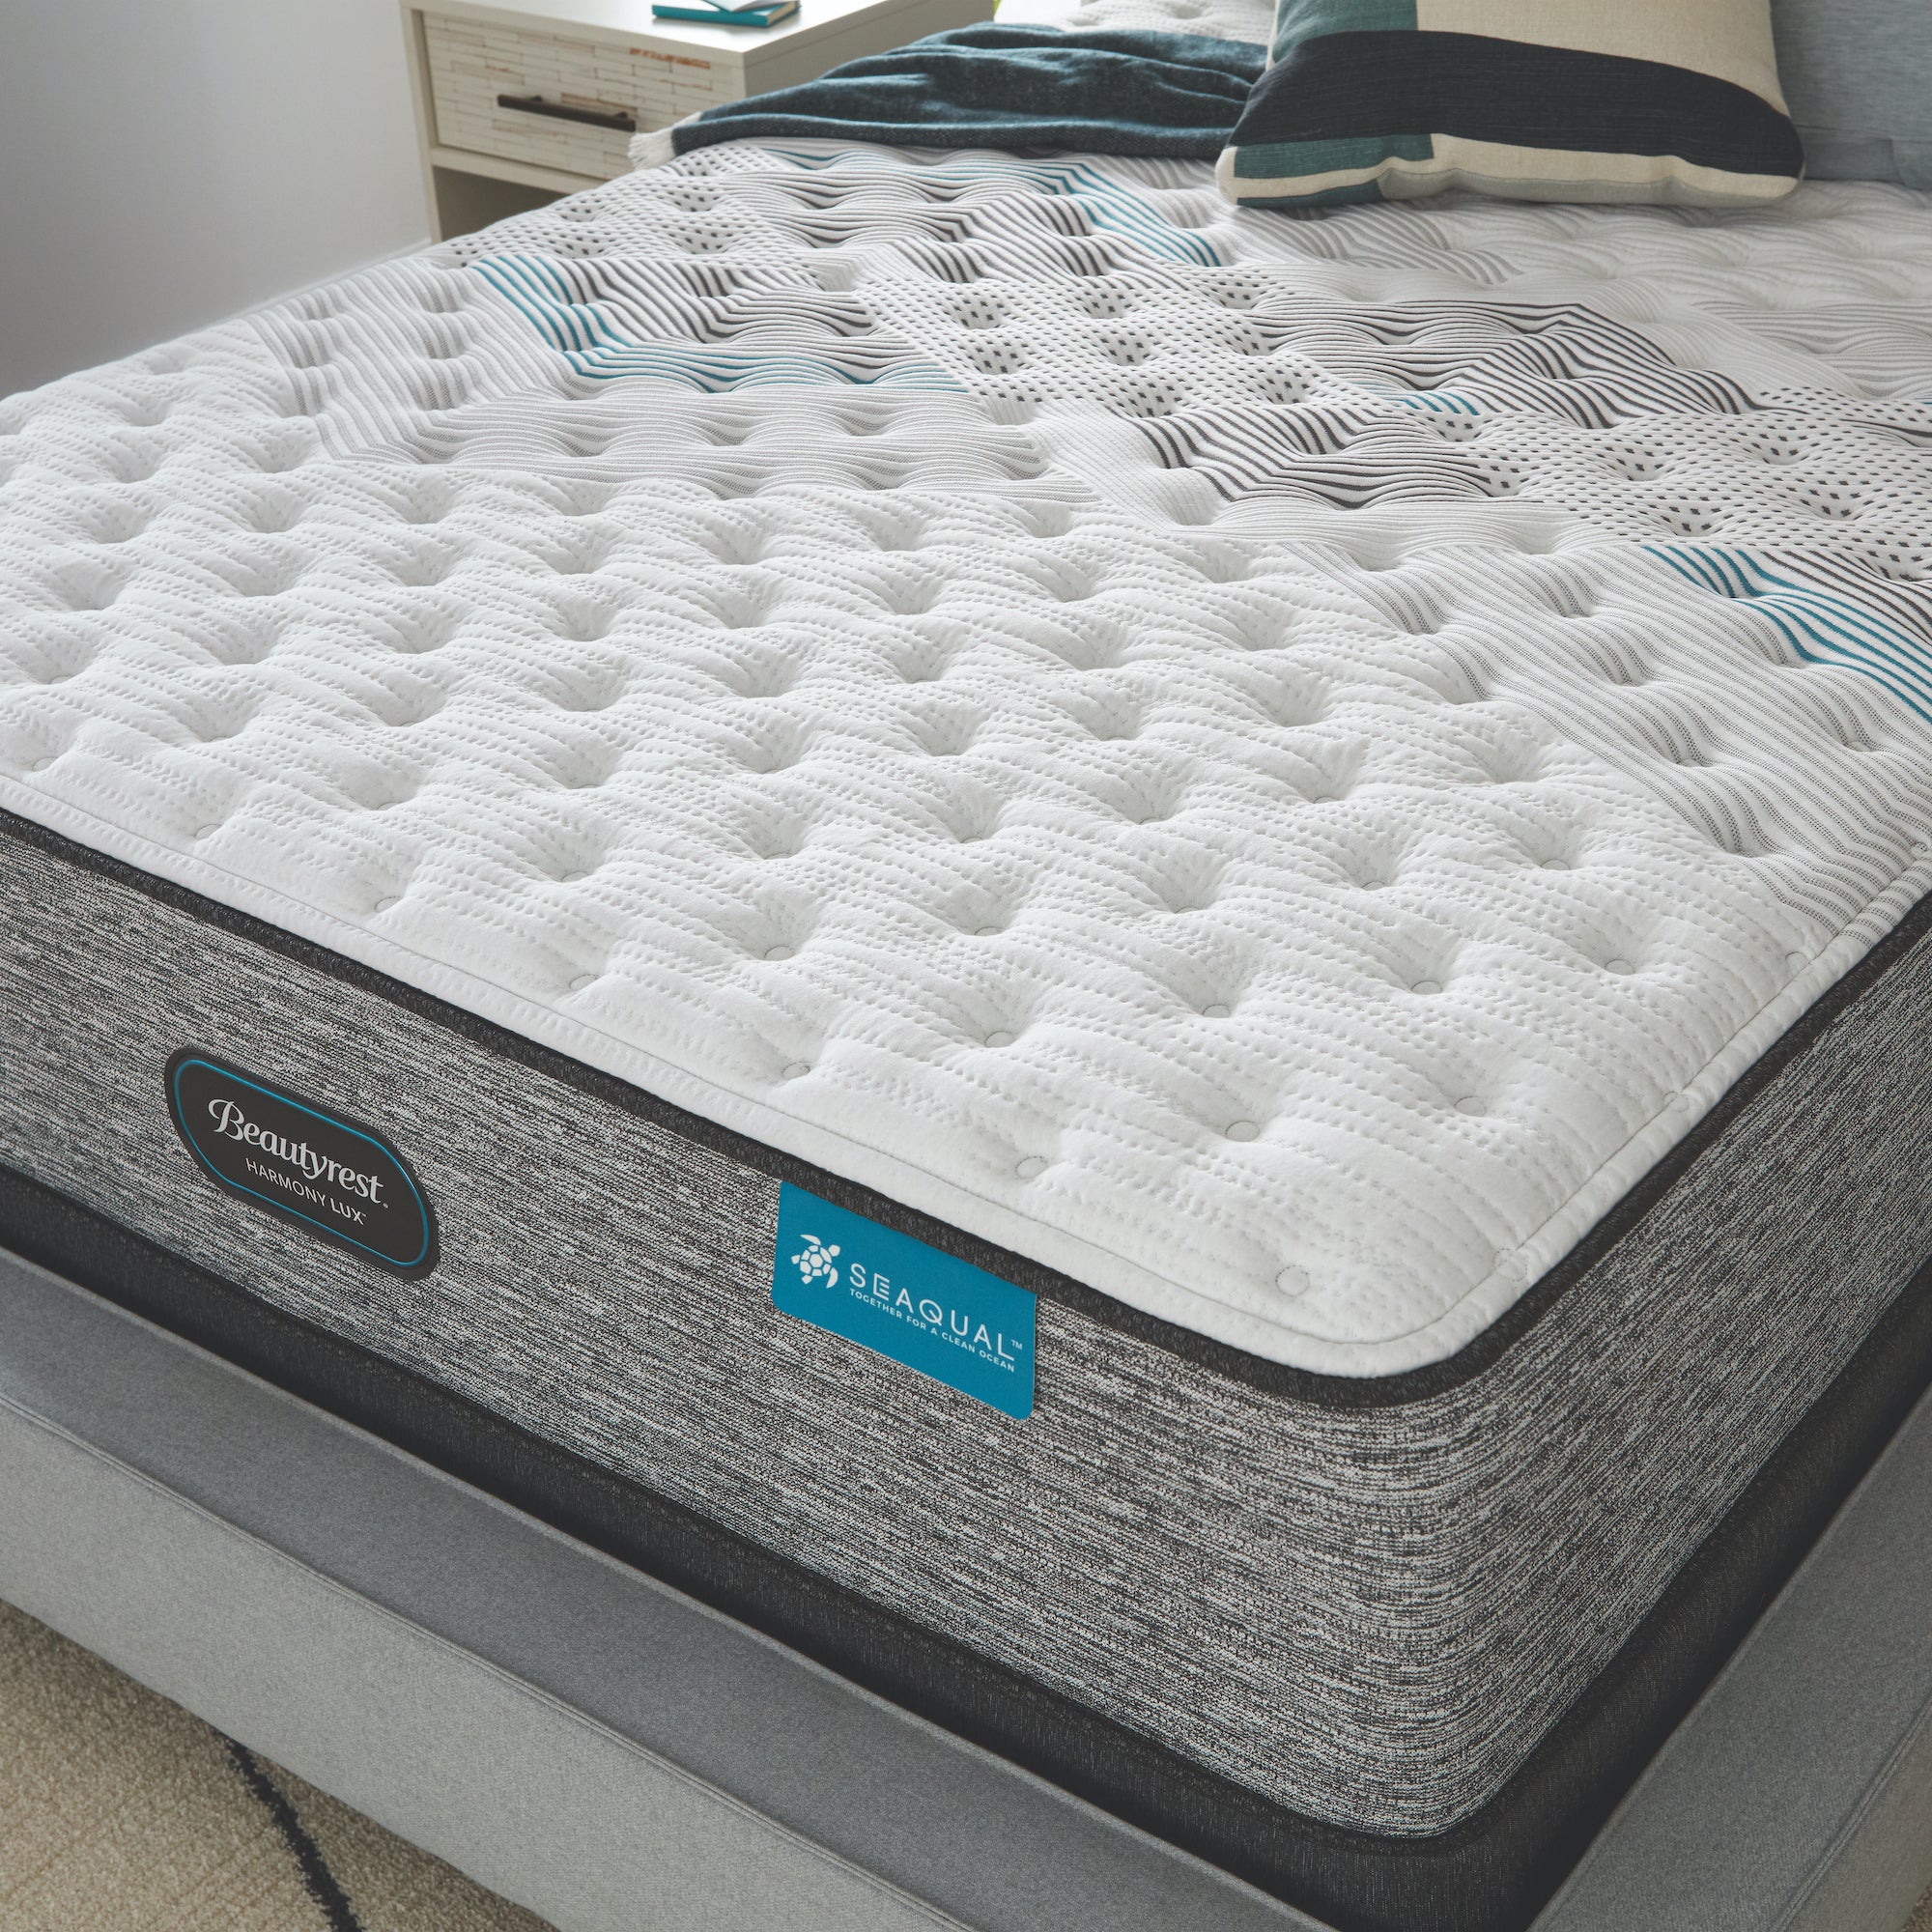 Beautyrest Harmony Lux Carbon Series Extra Firm Twin Mattress